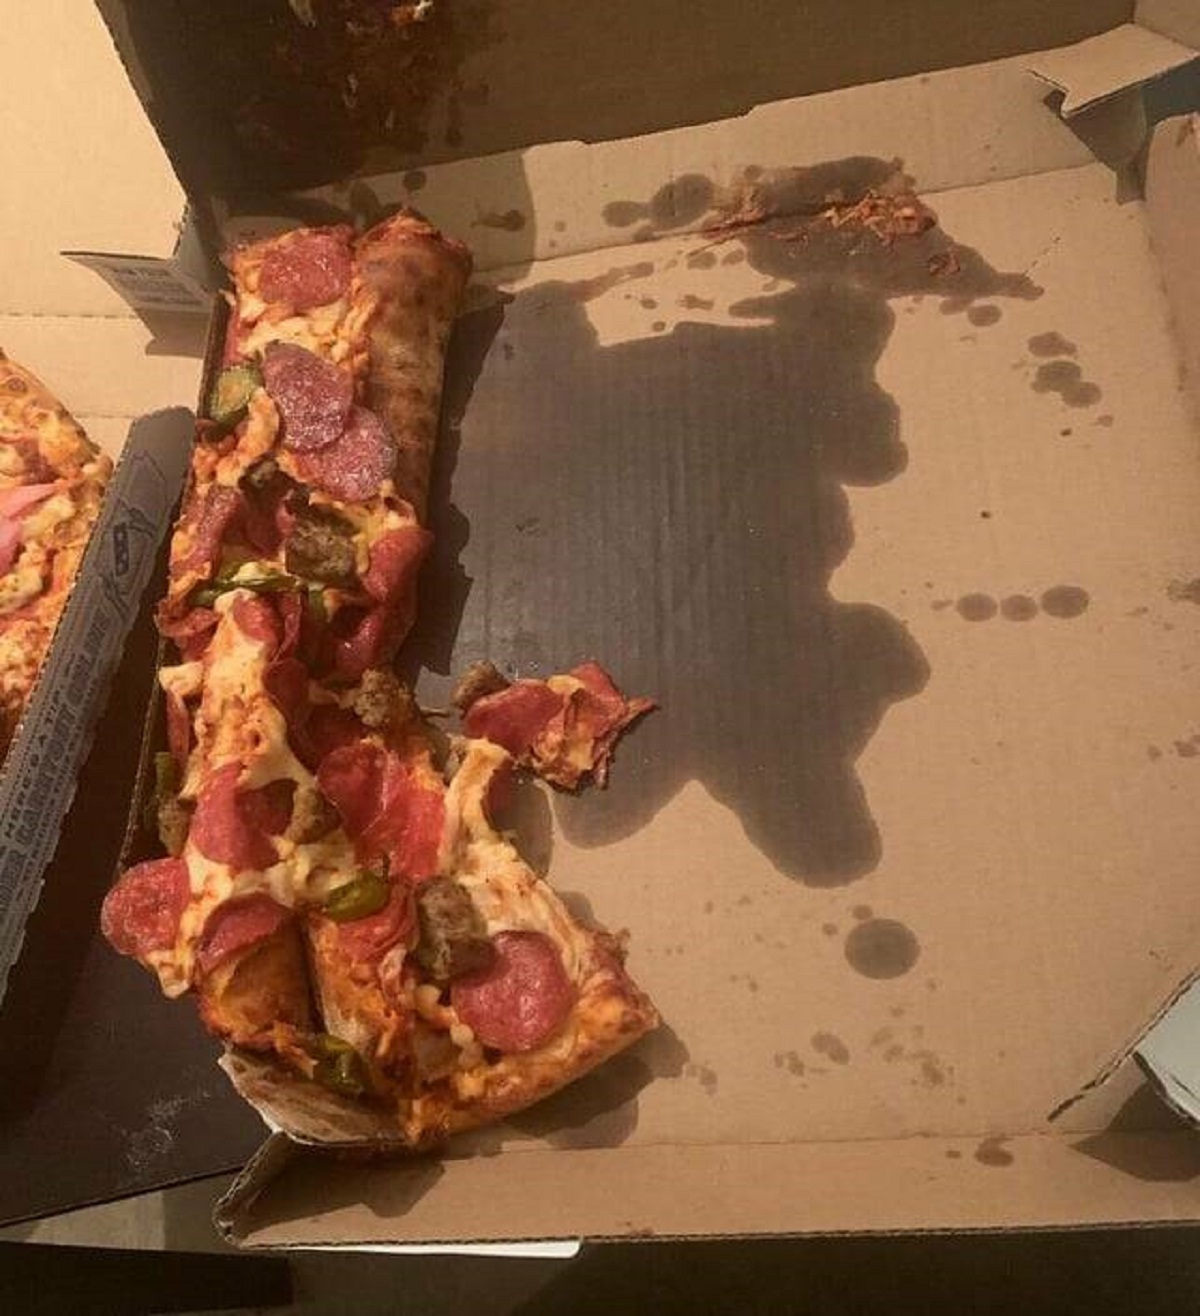 "This is what my pizza looked like after I was rear ended"